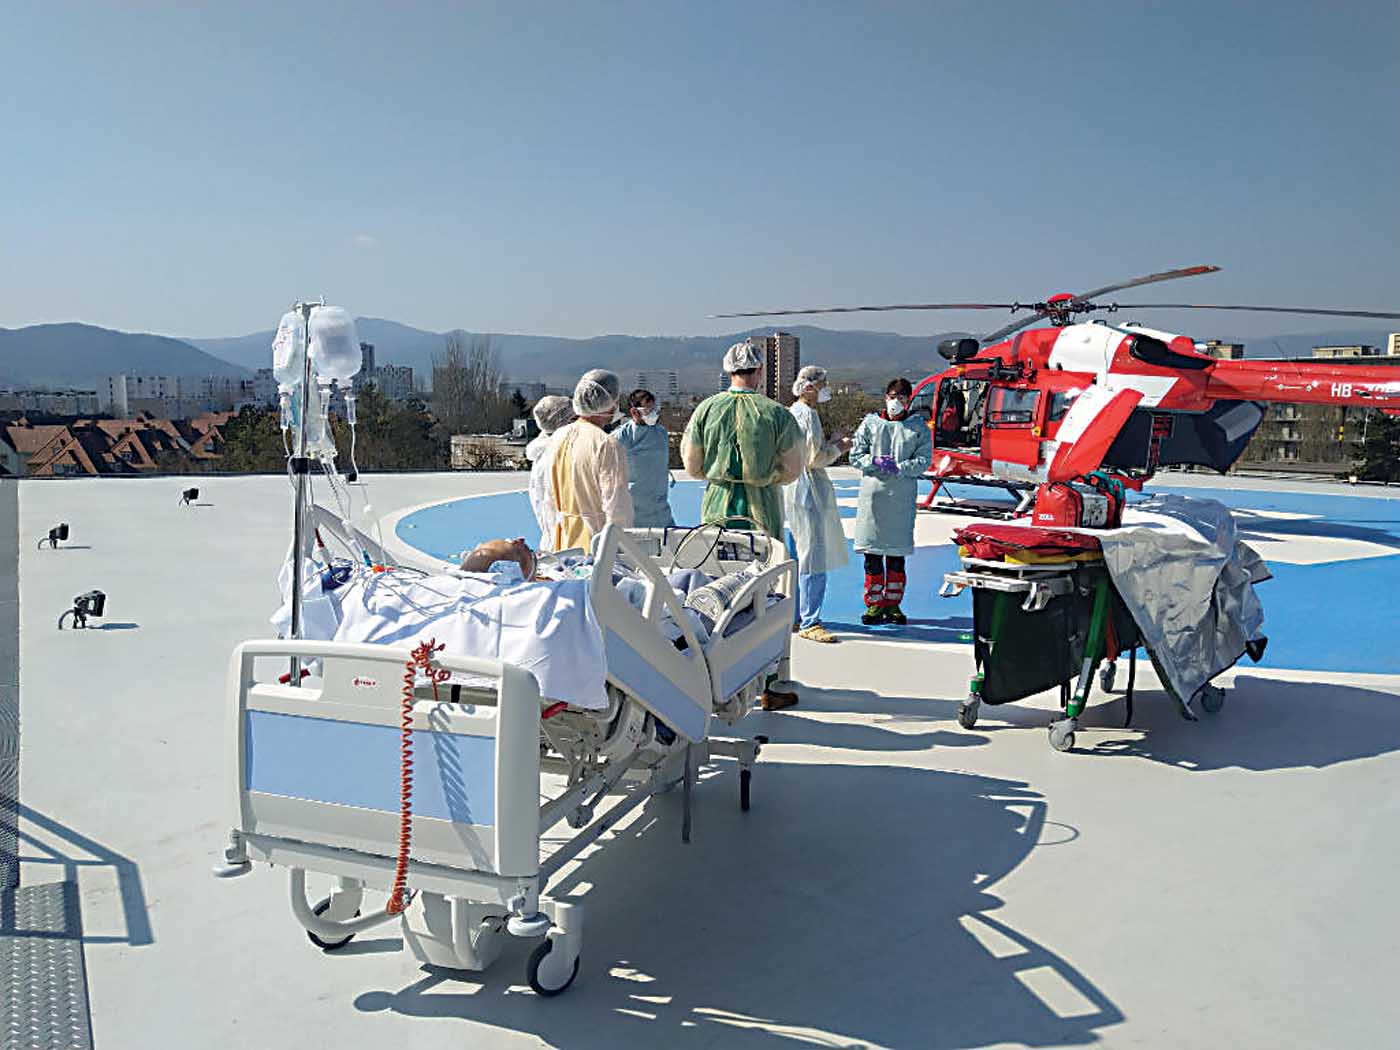 Some operators insinuated policies to not knowingly transport Covid-19 patients by air, opting instead to use ground assets. Rega Photo